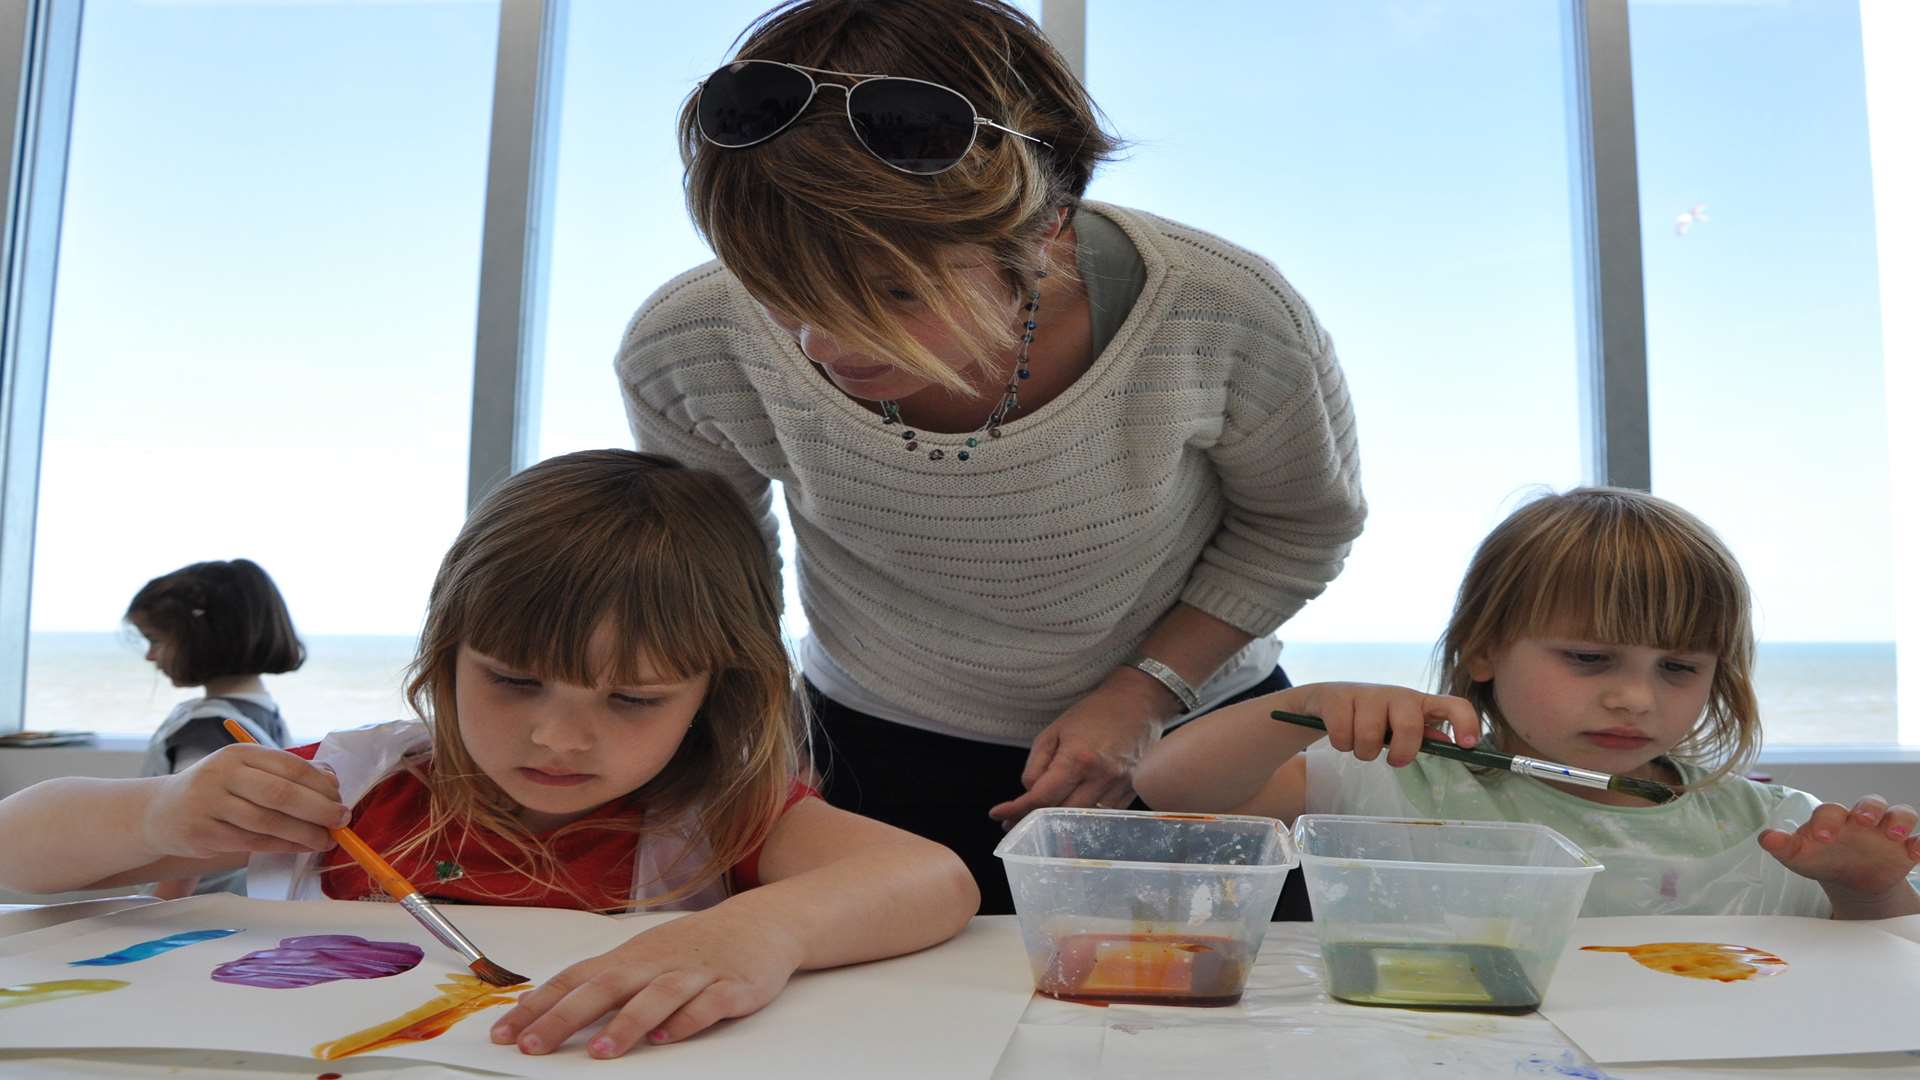 Get creative at the Turner Contemporary